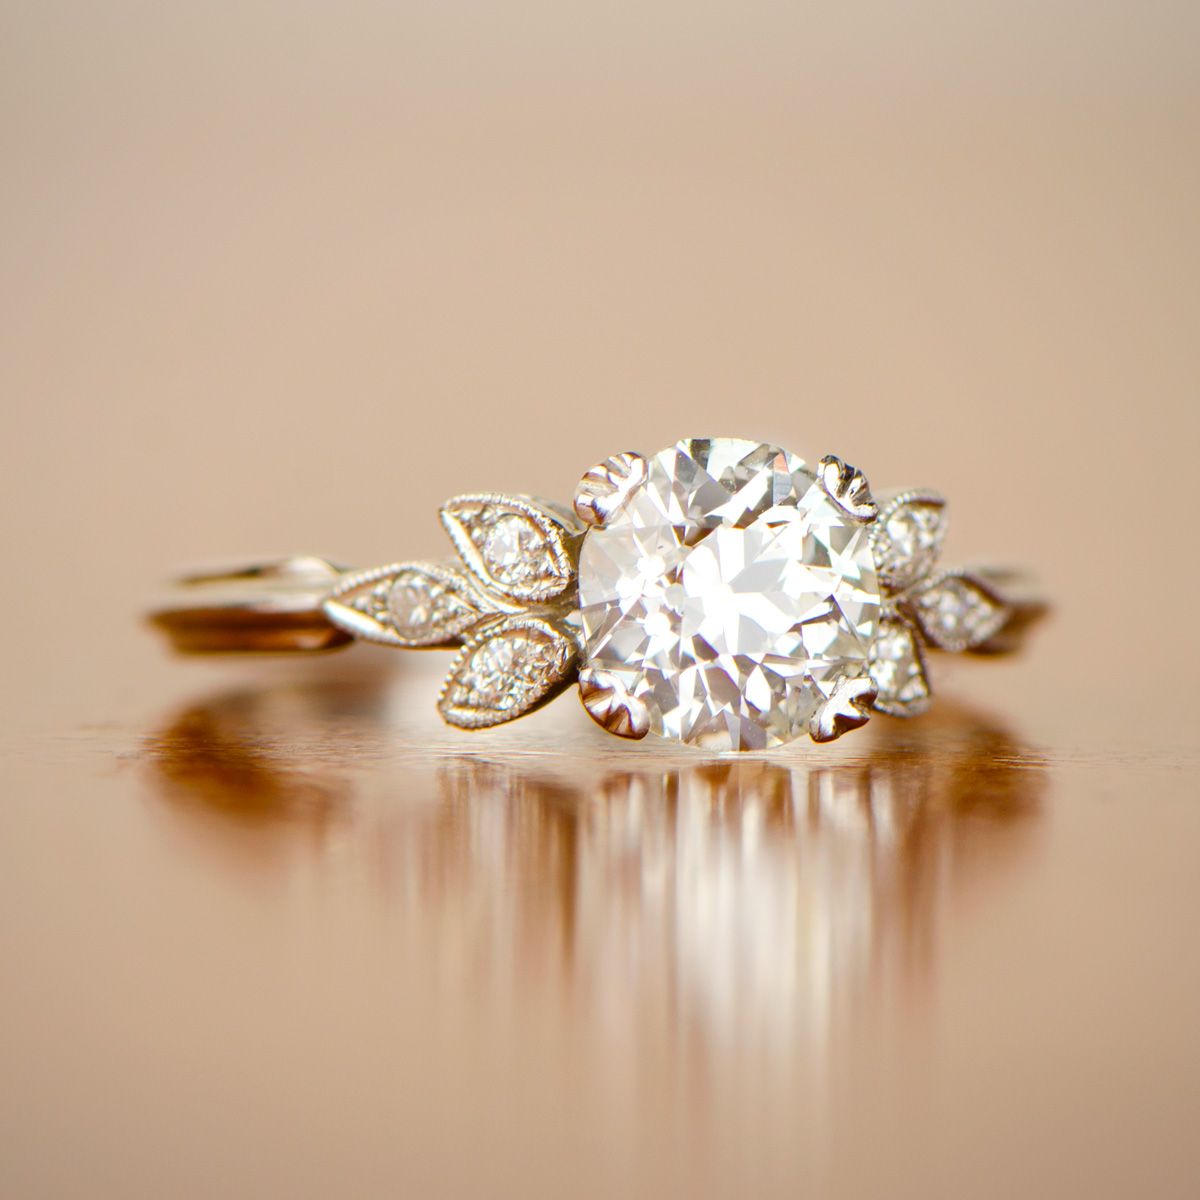 Pin On Vintage Engagement Rings Creative Photography